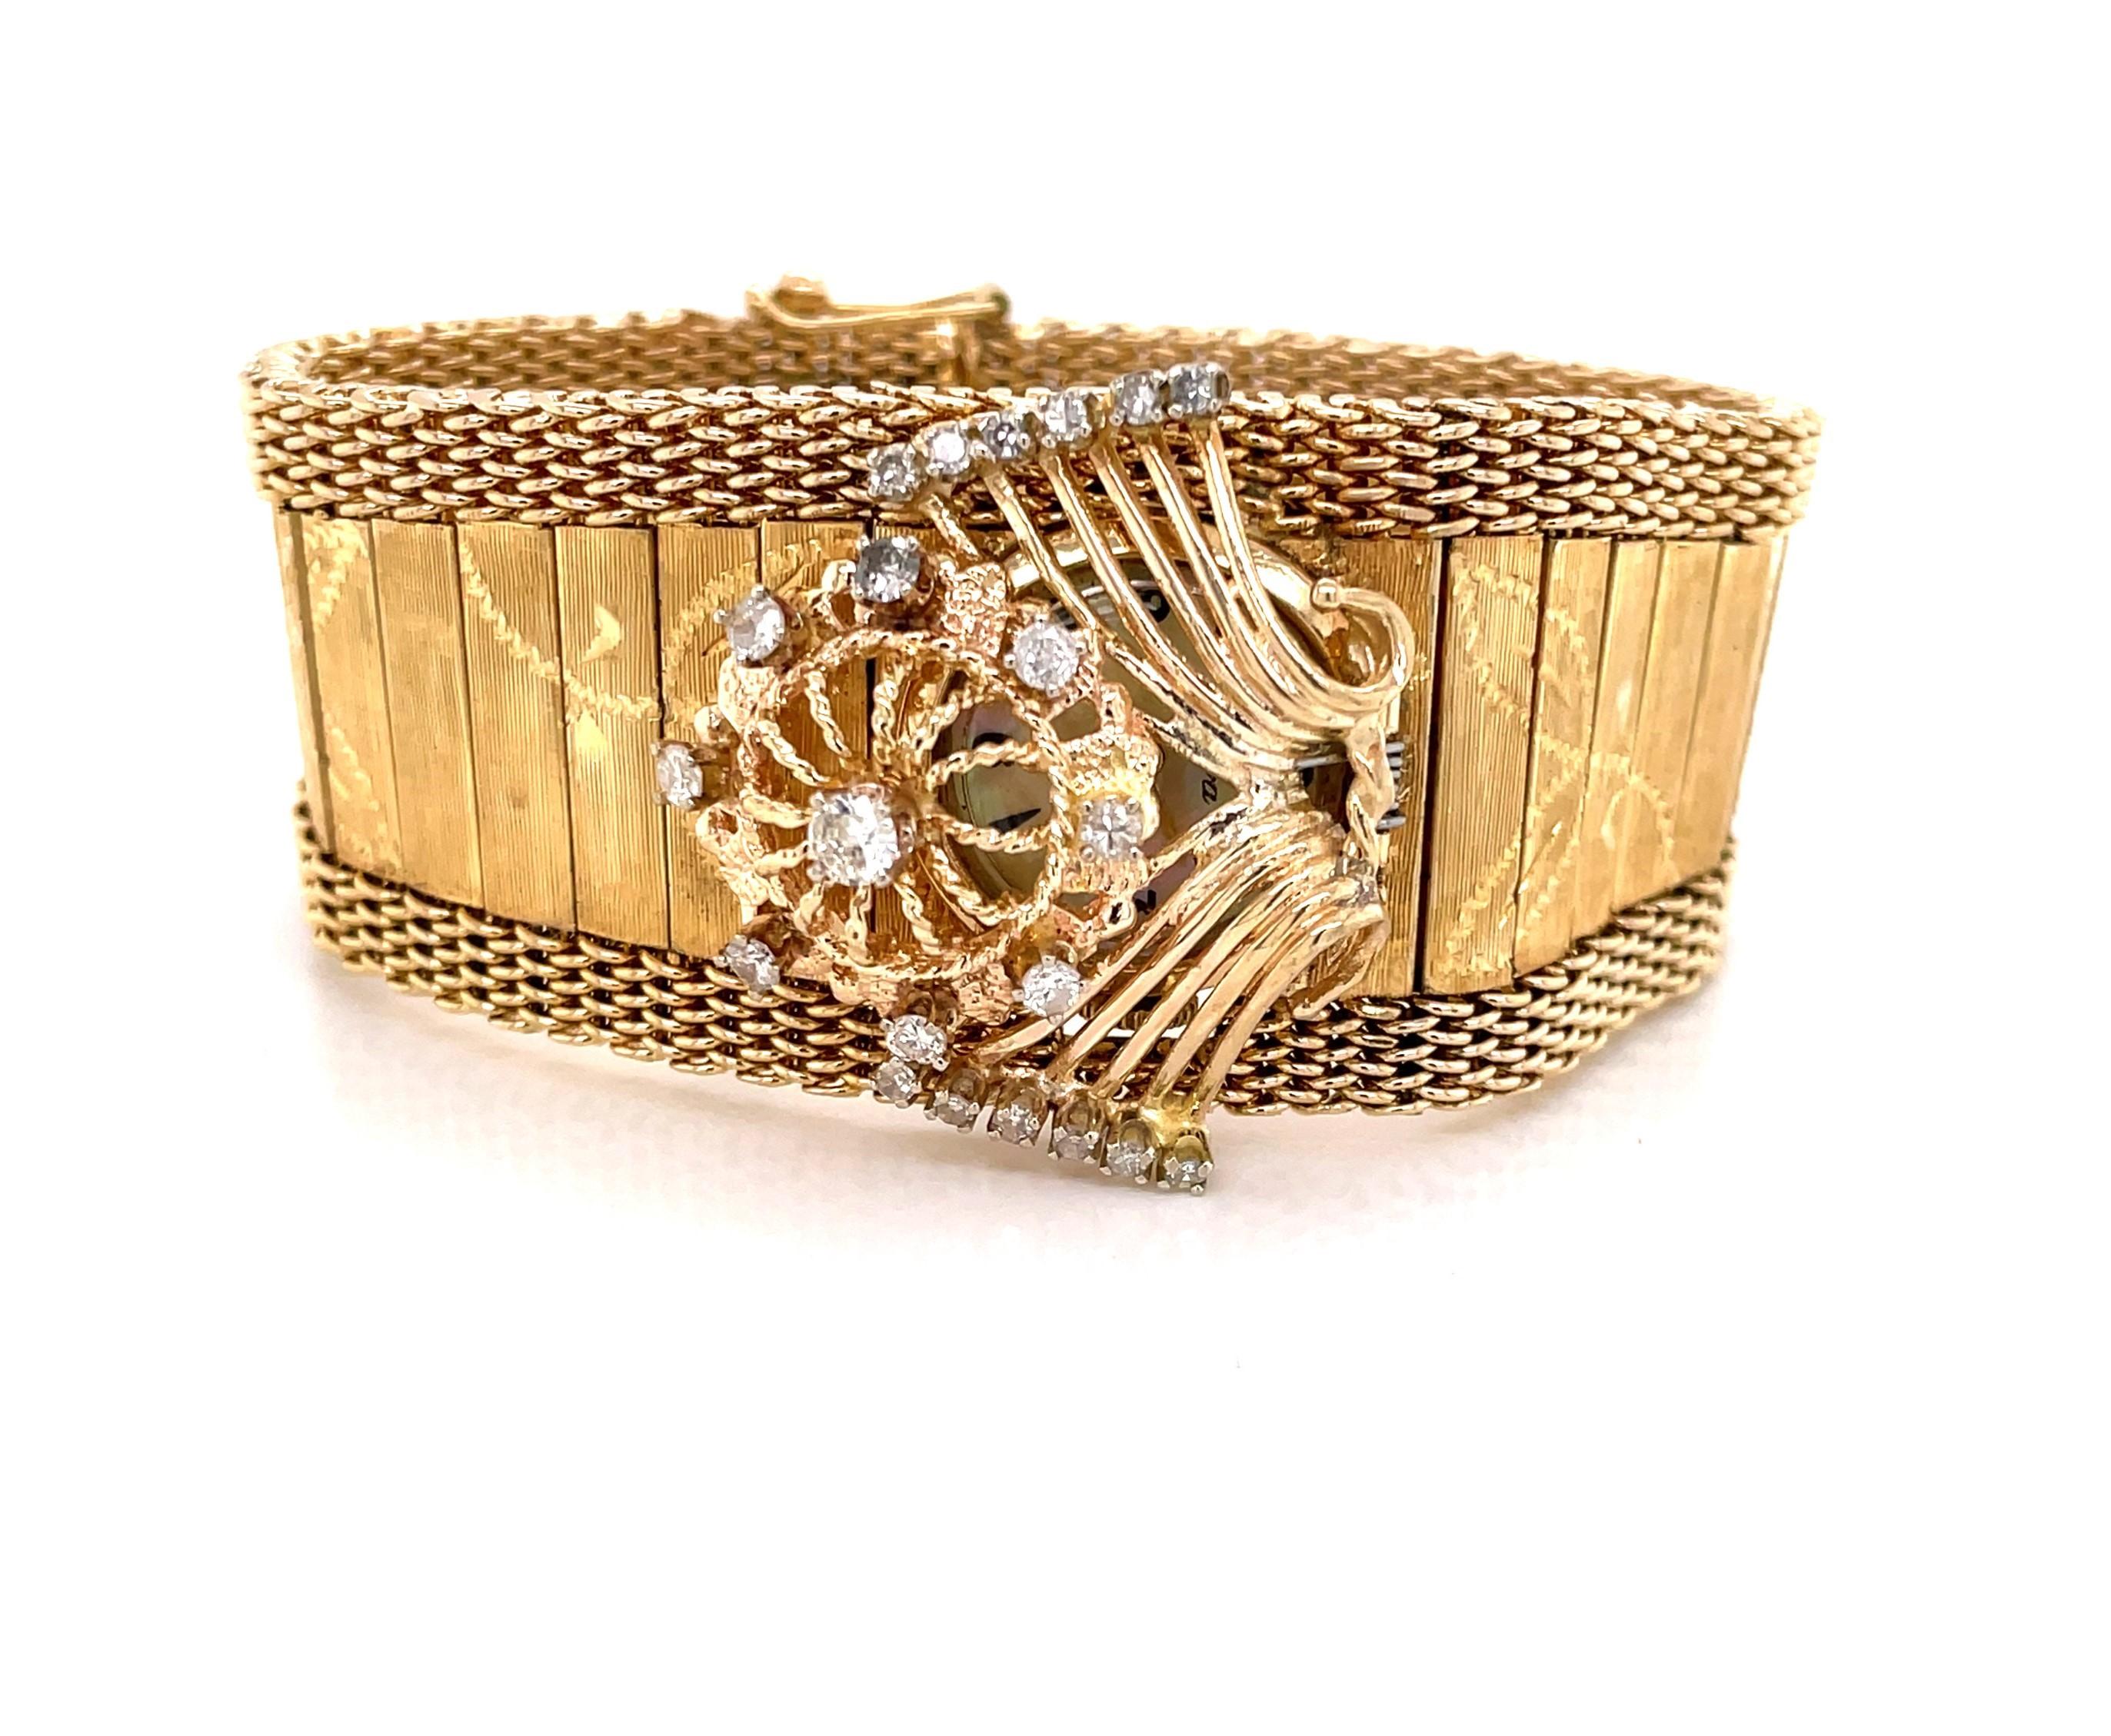 A unique diamond and gold filigree charm covers the face of the hidden timepiece on this unique circa 1940's heirloom bracelet watch. Rich in style, its gorgeous fourteen karat 14k yellow gold floral engraved bracelet graduates to the center giving